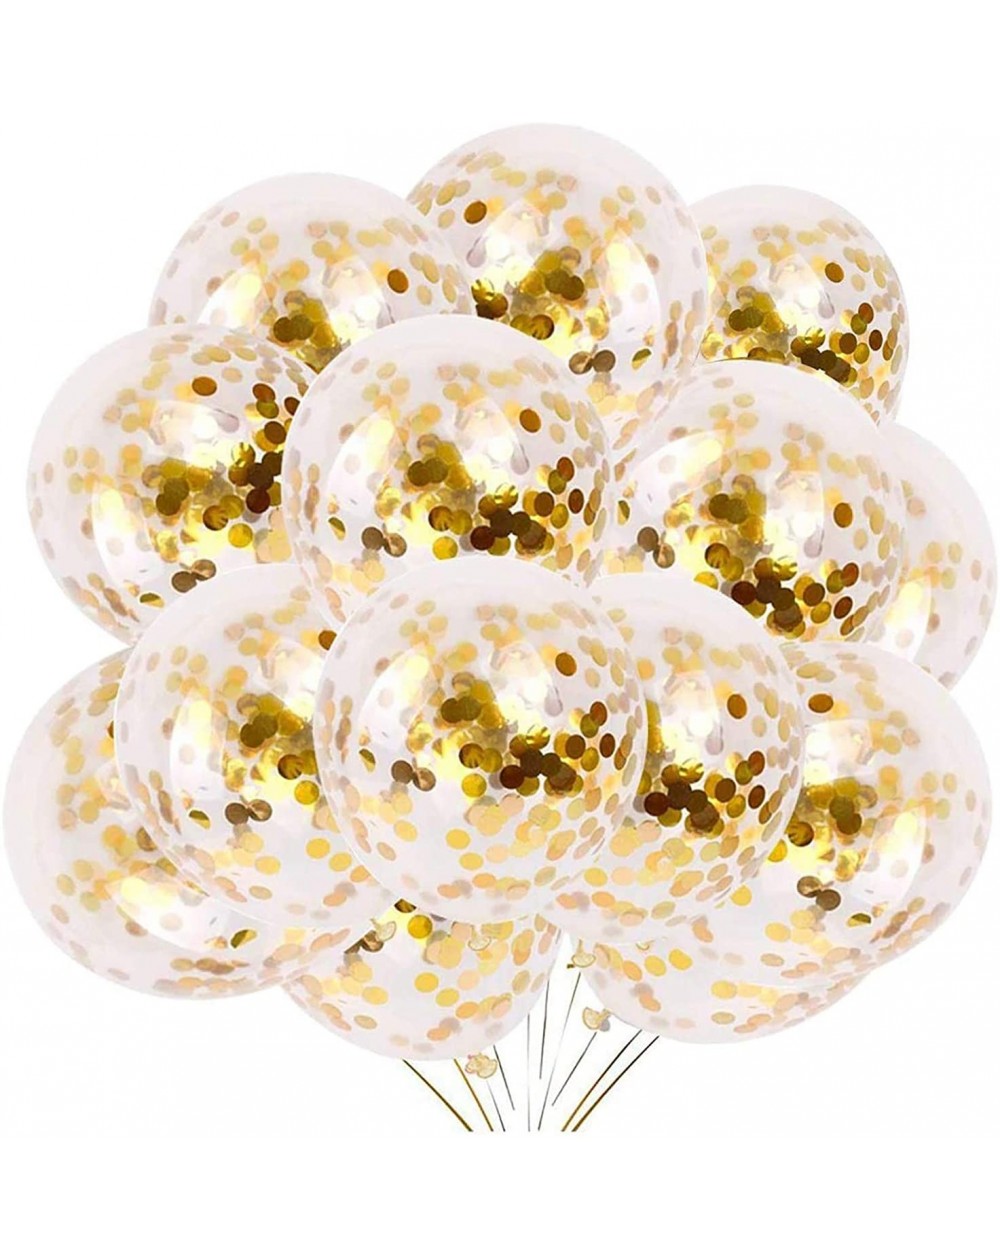 Balloons Gold Confetti Latex Party Balloons- 60pcs 12 Inch Helium Balloons with Golden Paper Confetti Dots for Birthday Baby ...